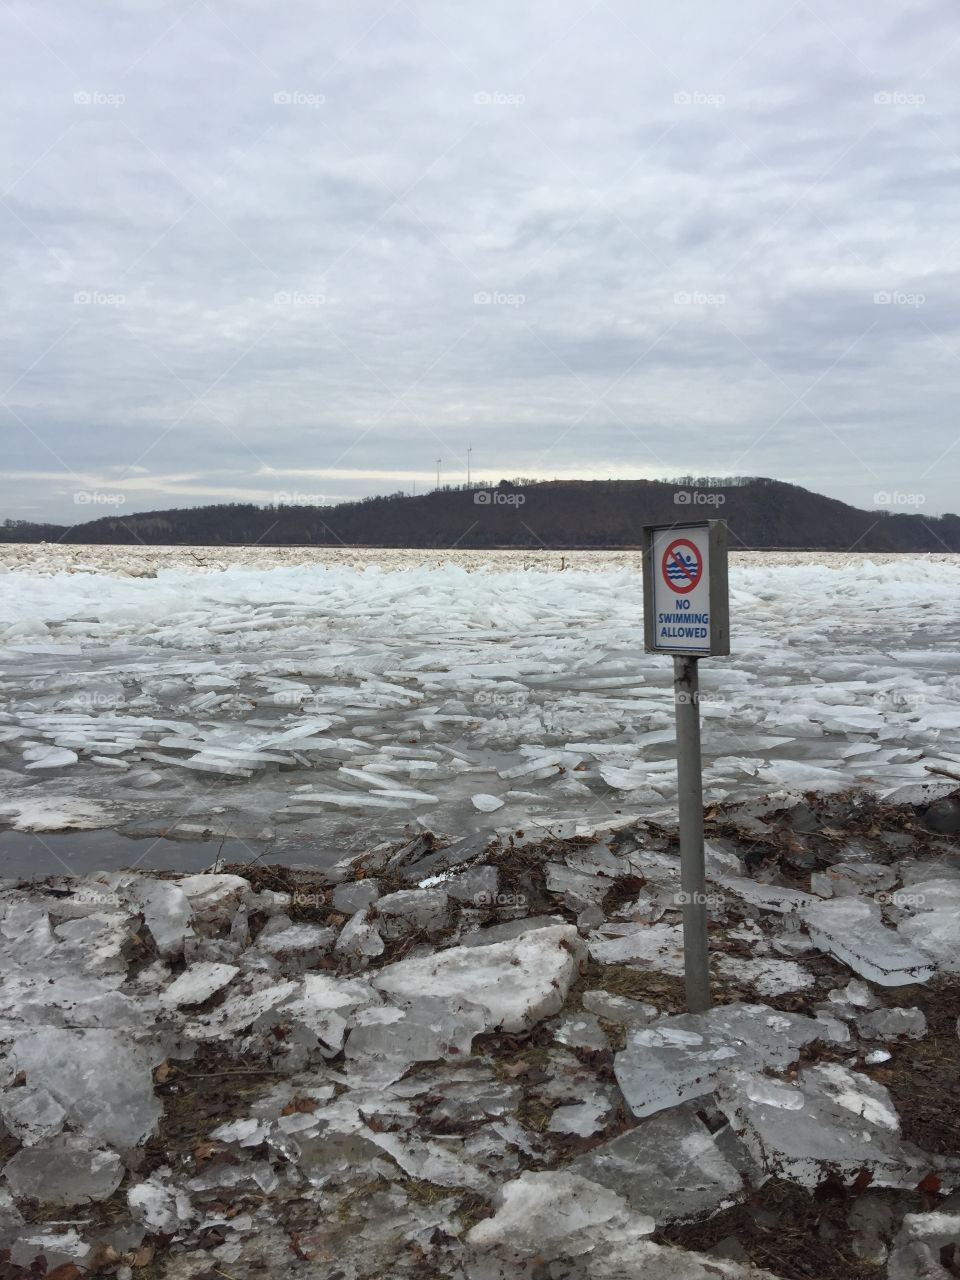 No swimming allowed? How about ice fishing?